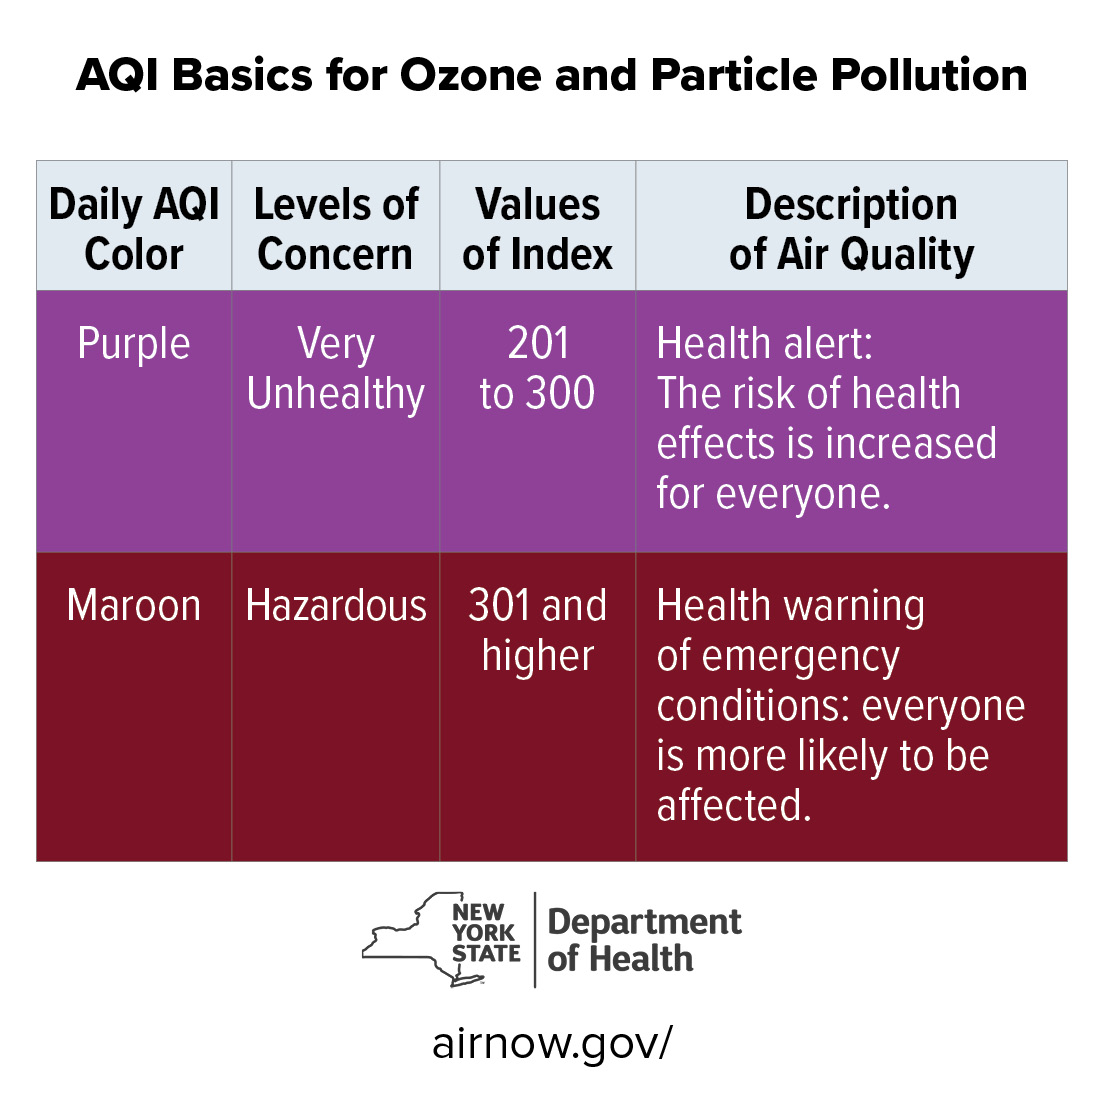 Smoke from wildfires that typically occur during the summer may affect air quality in New York State and the air quality may not be healthy for everyone. Check the current air quality in your area before heading outdoors: AirNow.gov